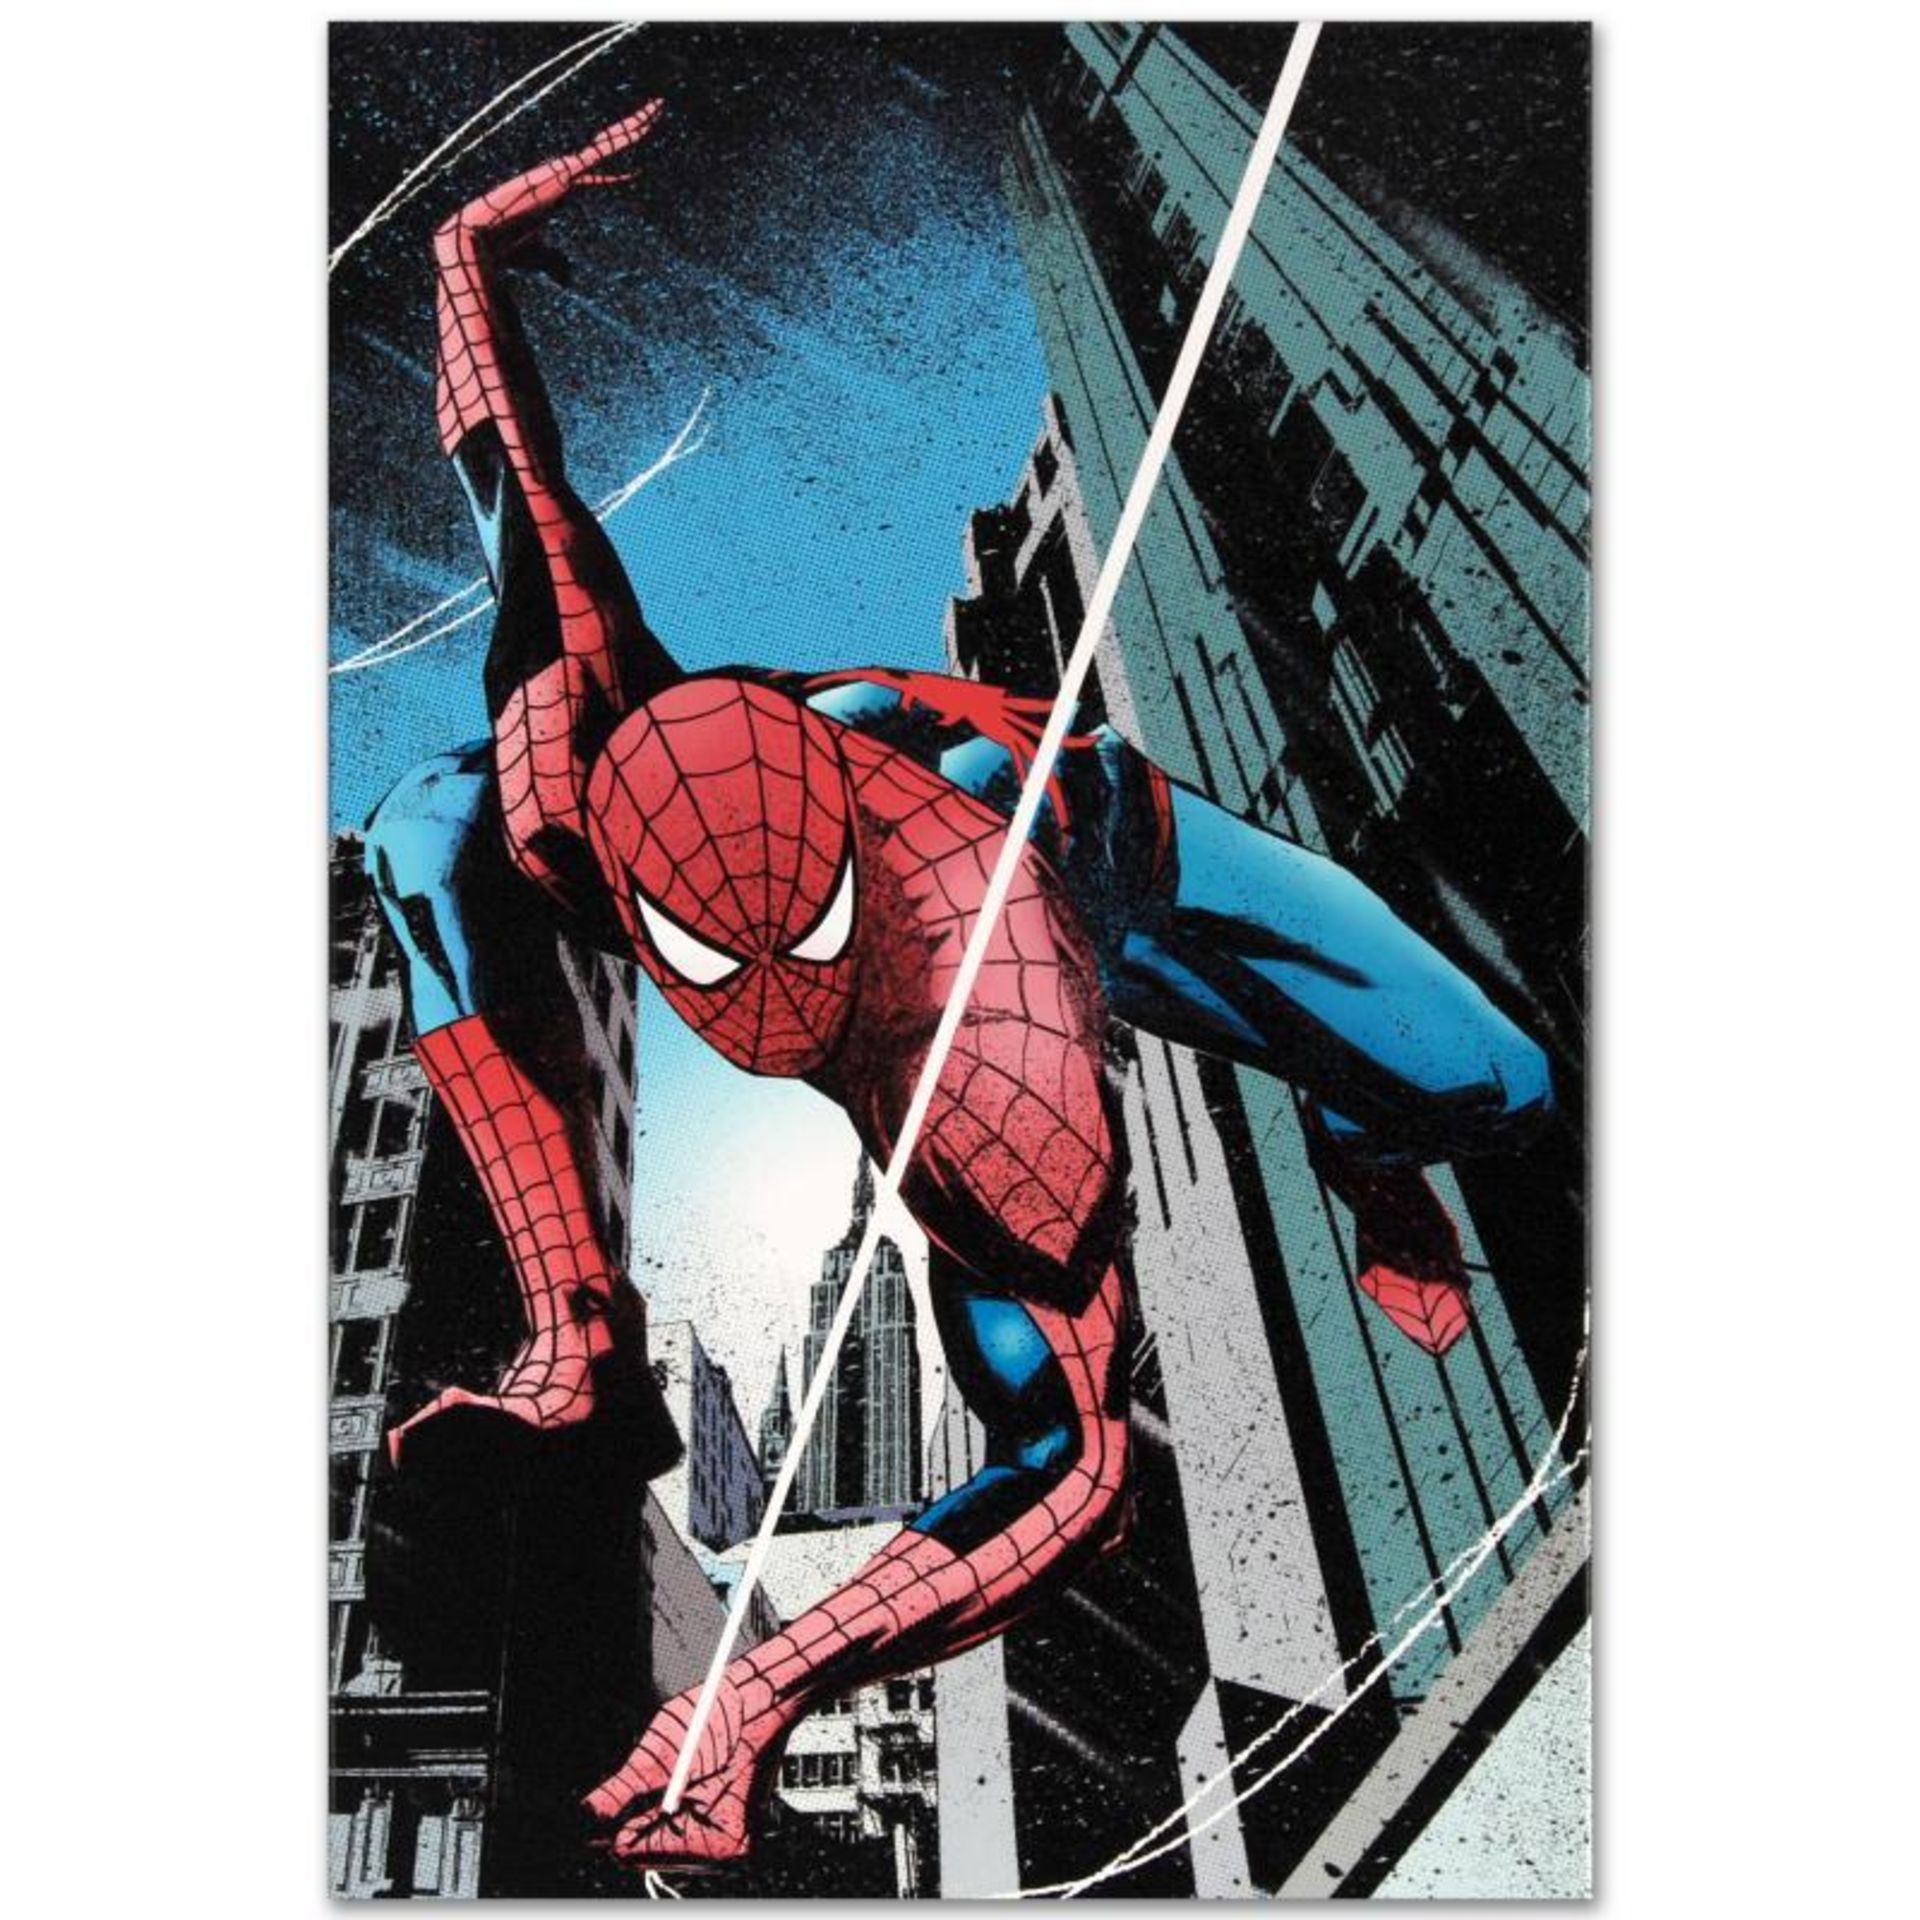 Marvel Comics "Amazing Spider-Man: Extra #3" Numbered Limited Edition Giclee on